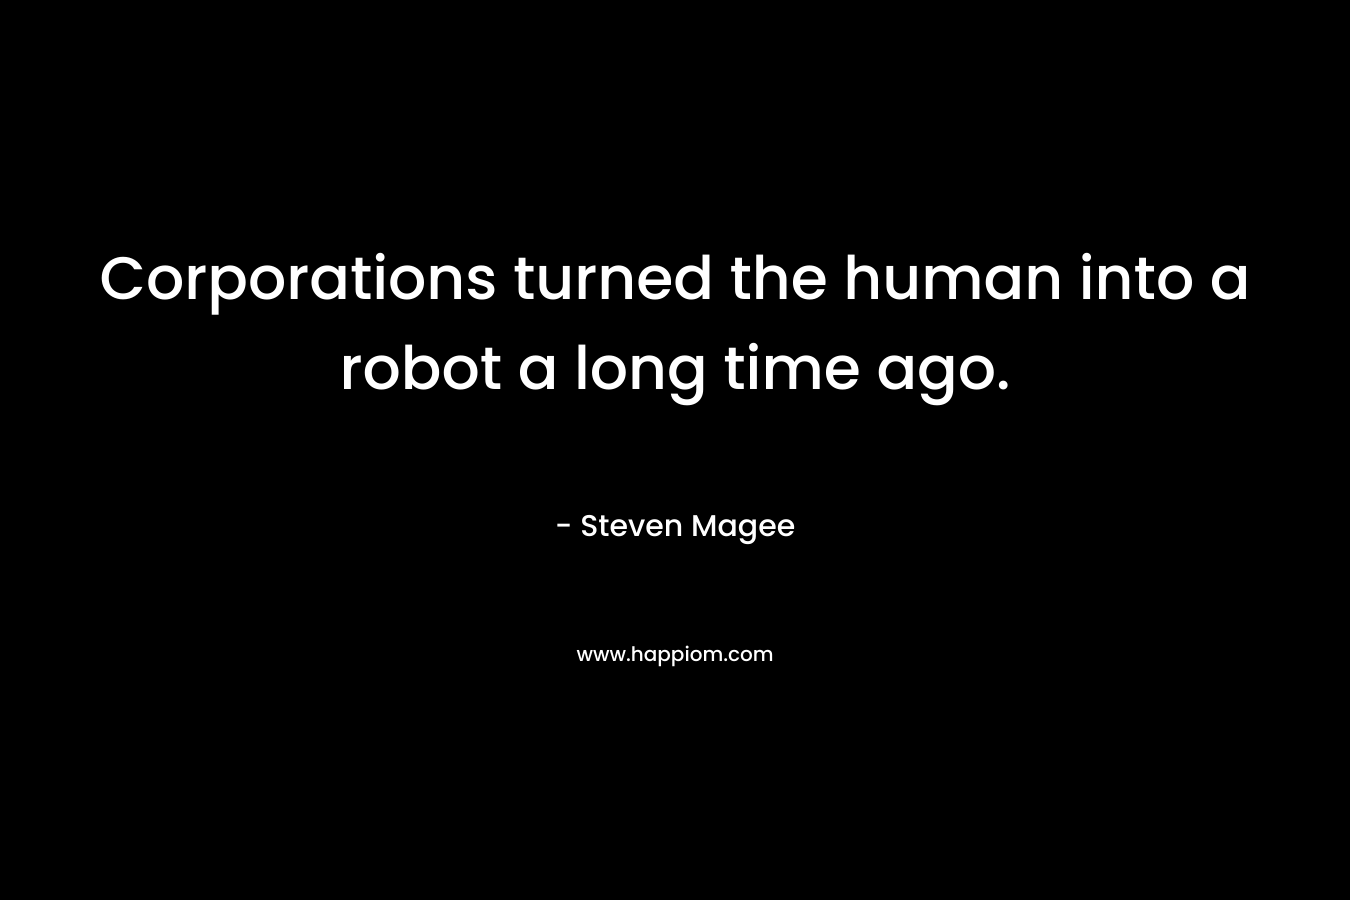 Corporations turned the human into a robot a long time ago.